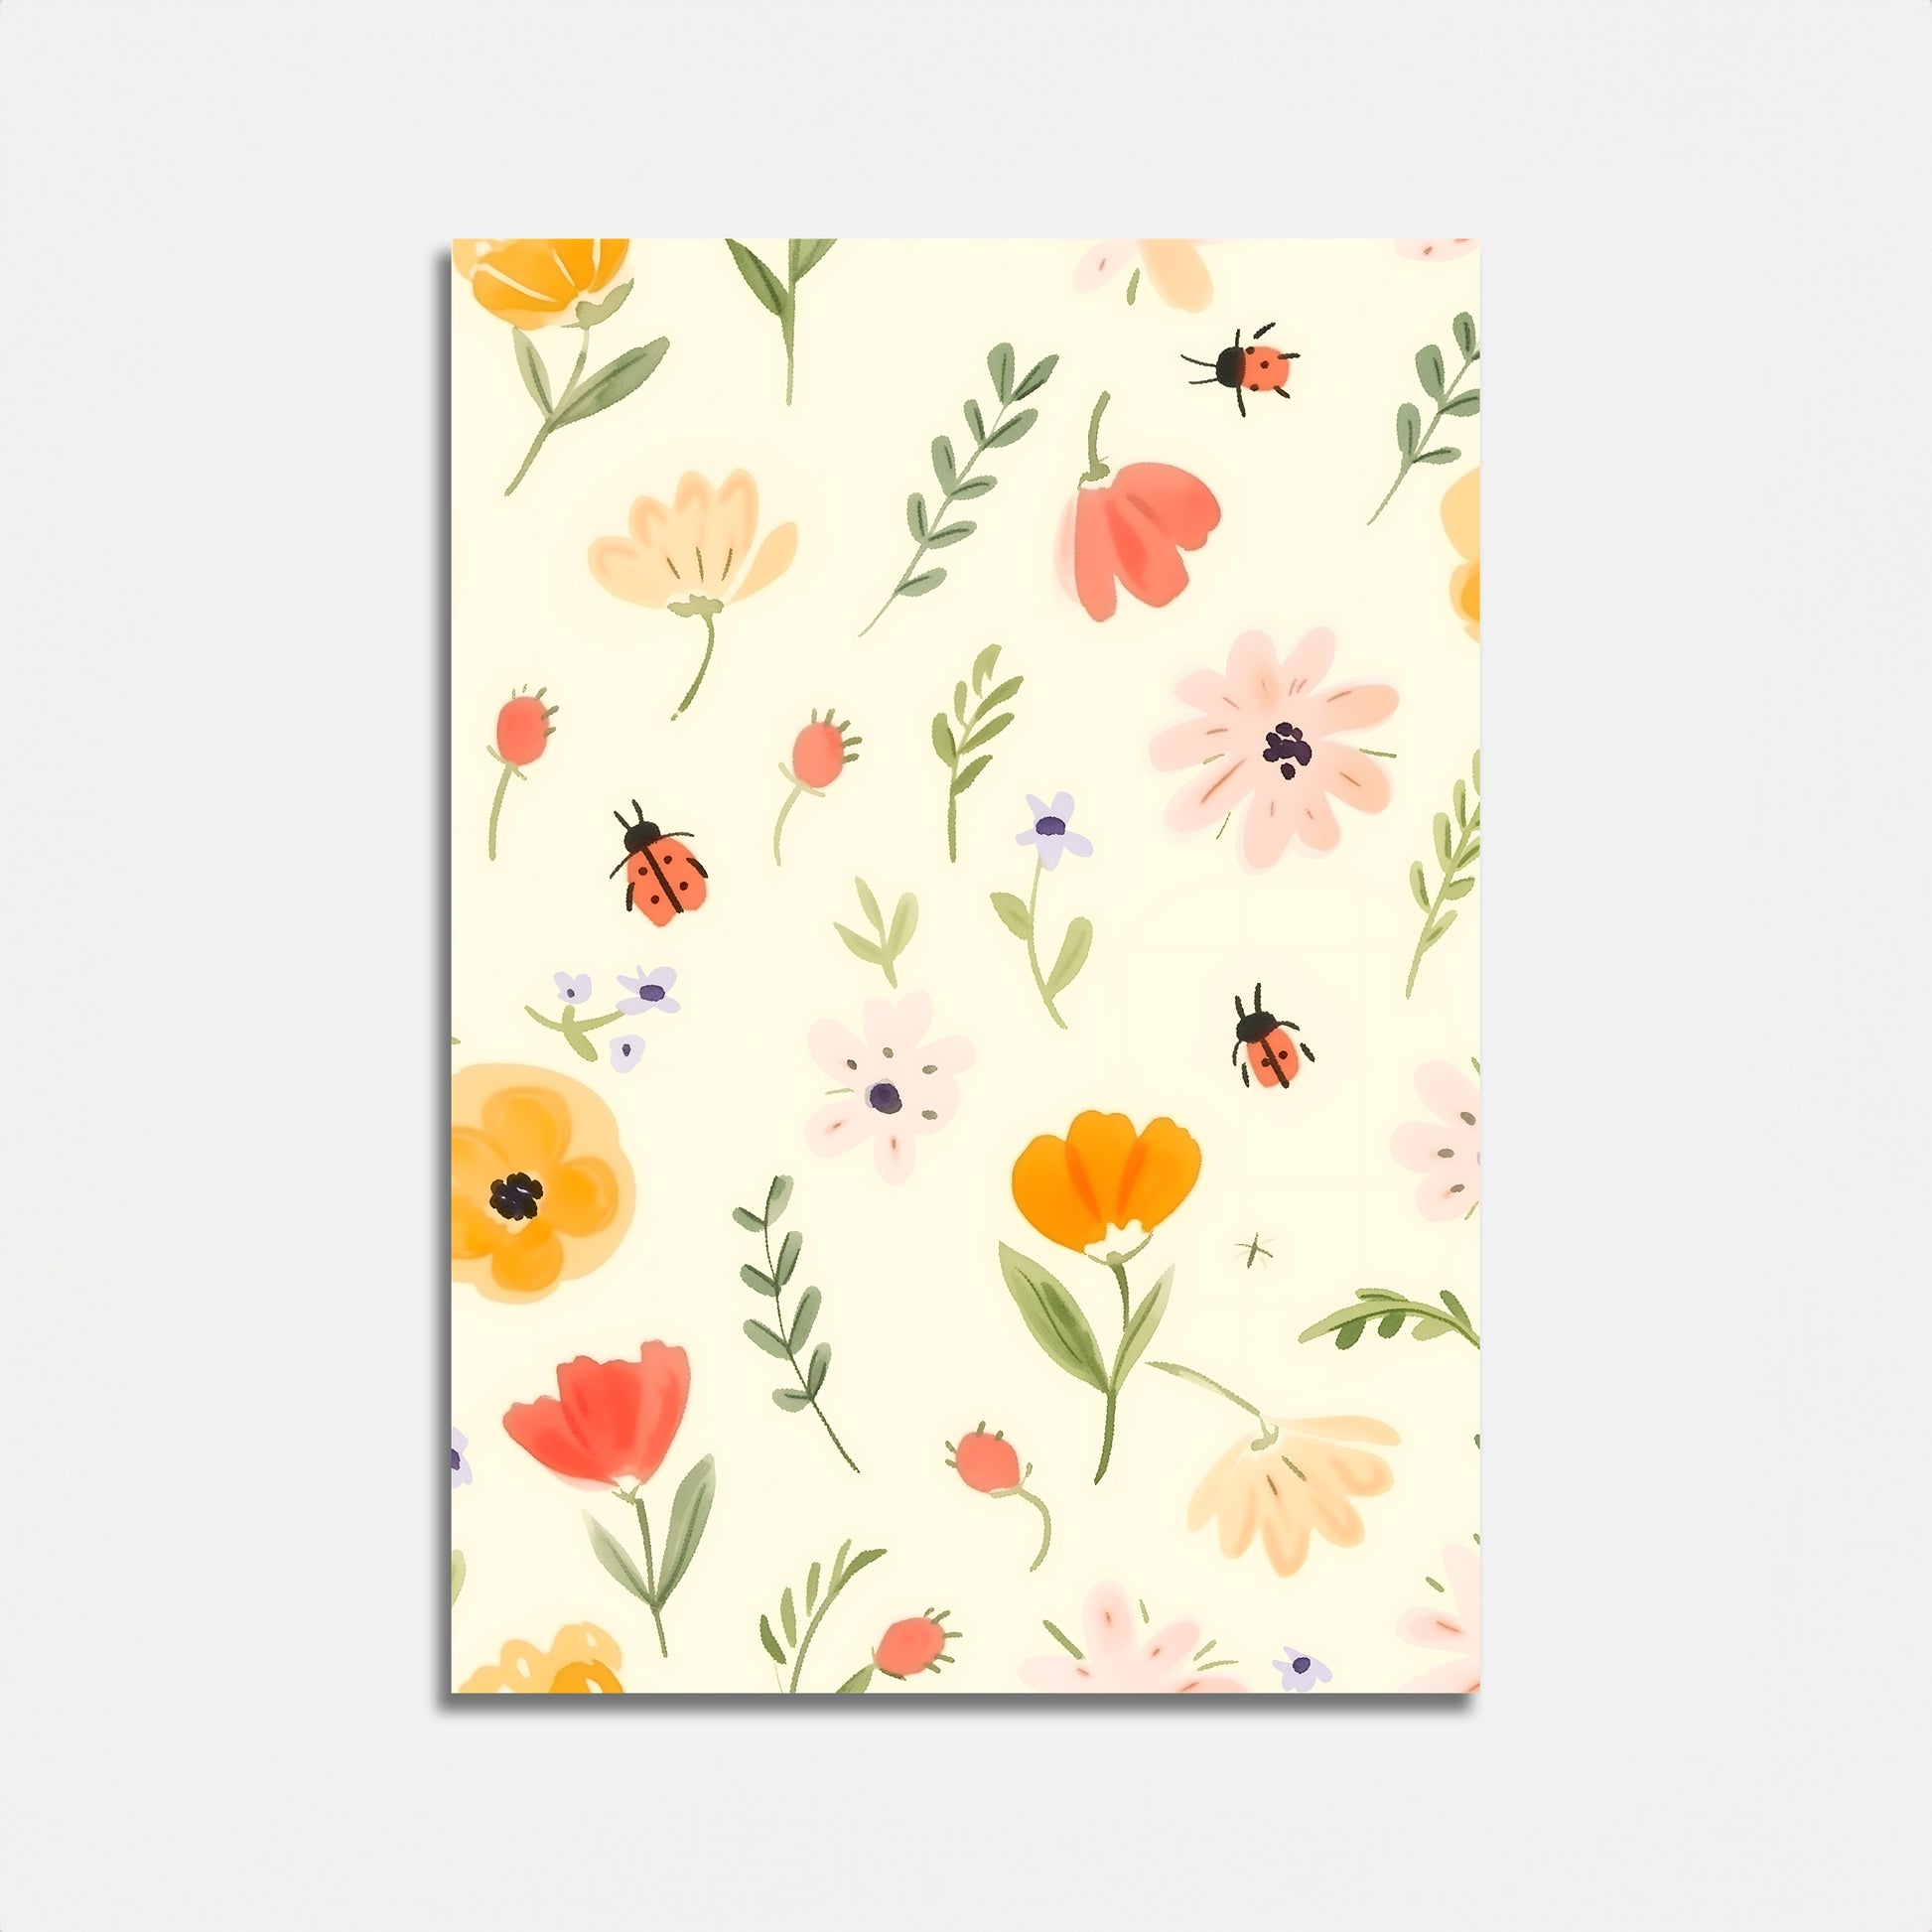 A notebook with a floral and ladybug pattern on the cover.